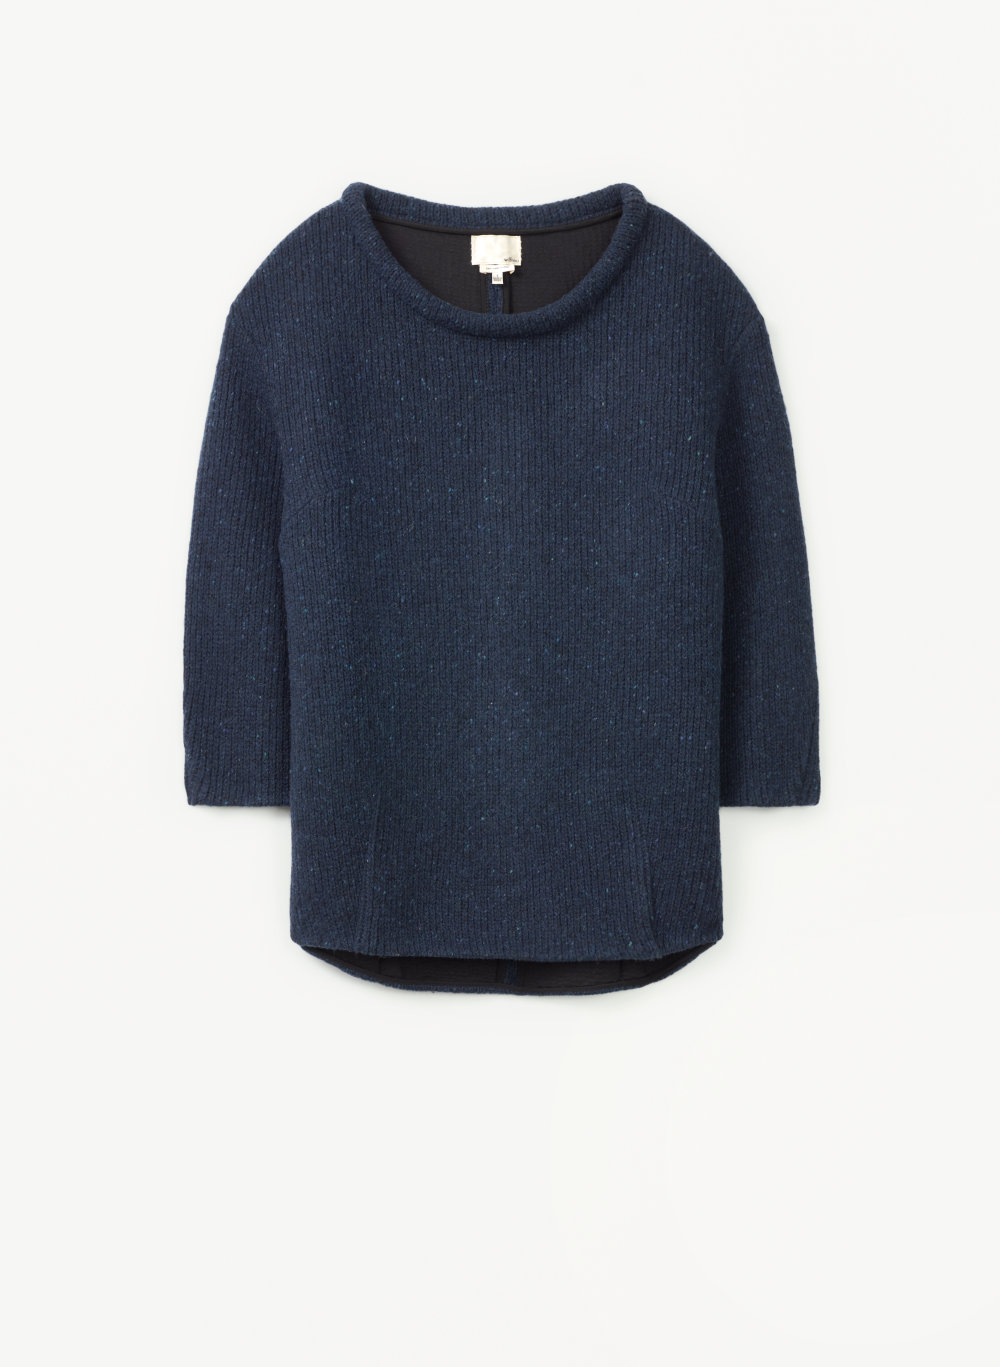 Cocoon Wilfred Sweater